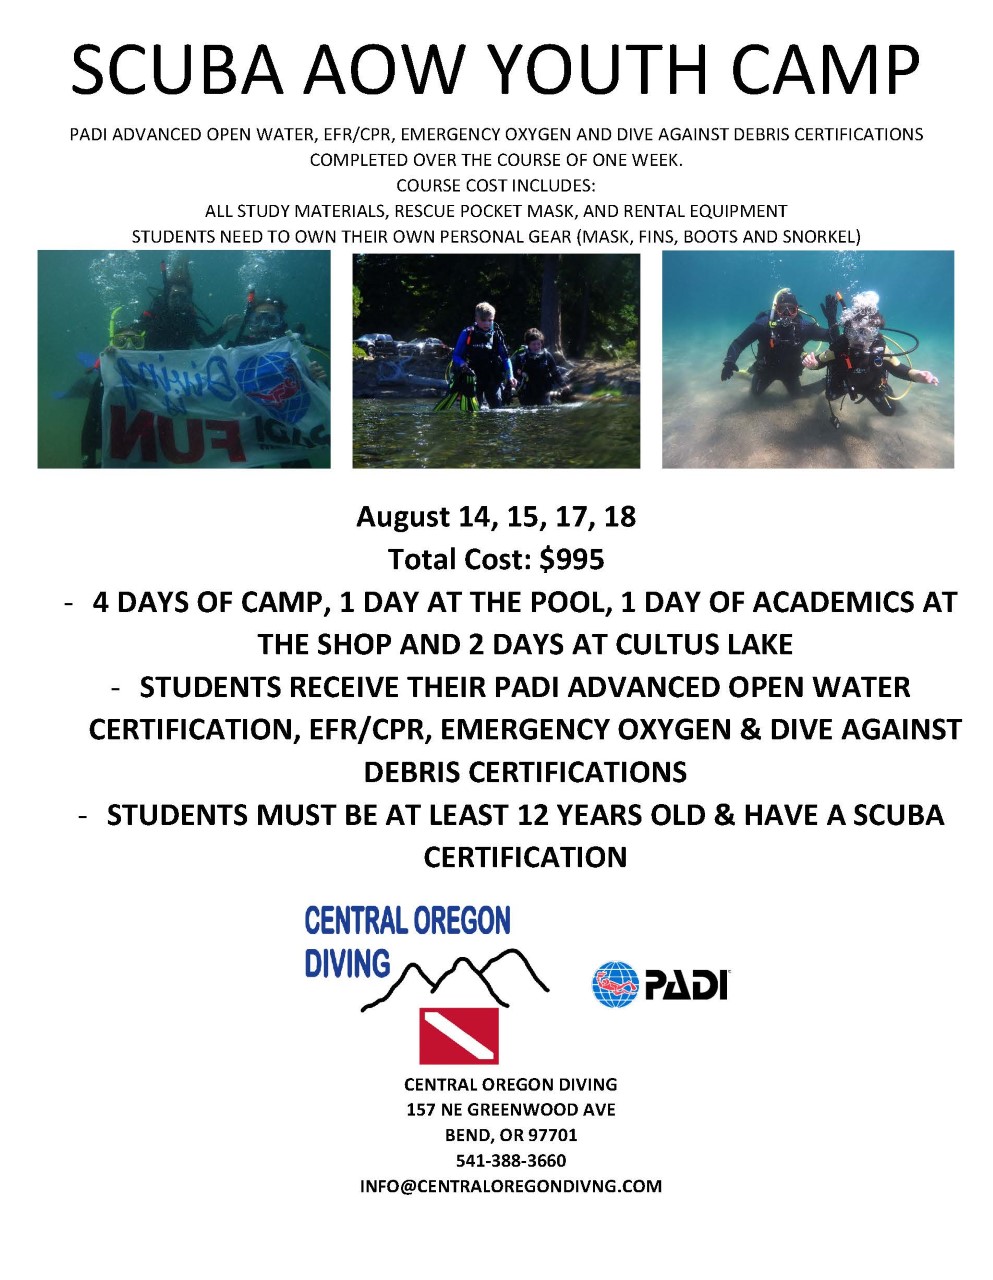 YOUTH AOW DAY SCUBA CAMP